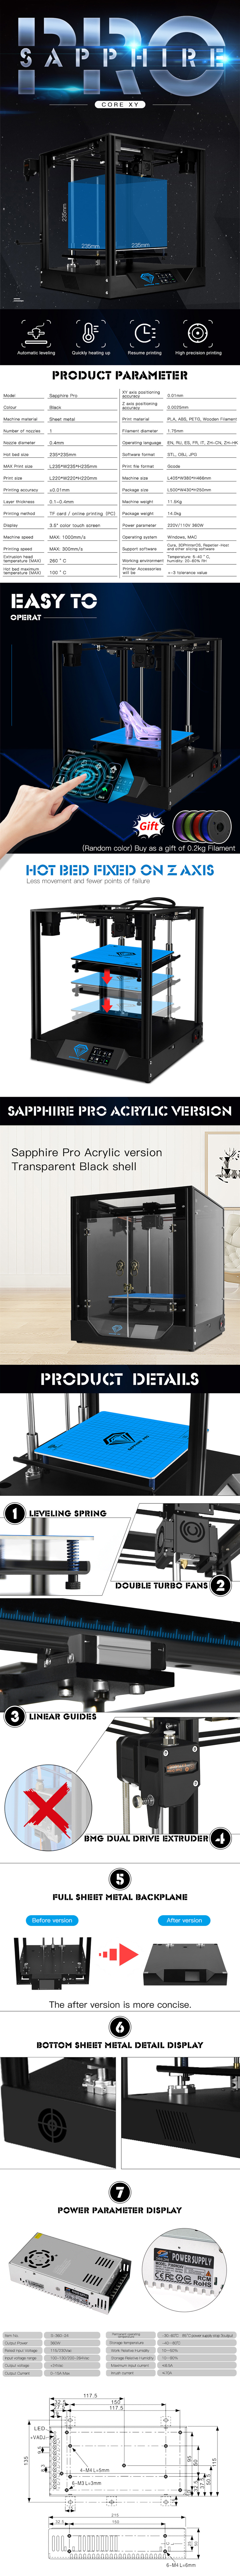 TWO TREES® Sapphire Pro CoreXY DIY 3D Printer Kit 235*235*235mm Printing Size With Upgraded Acrylic Shell 8